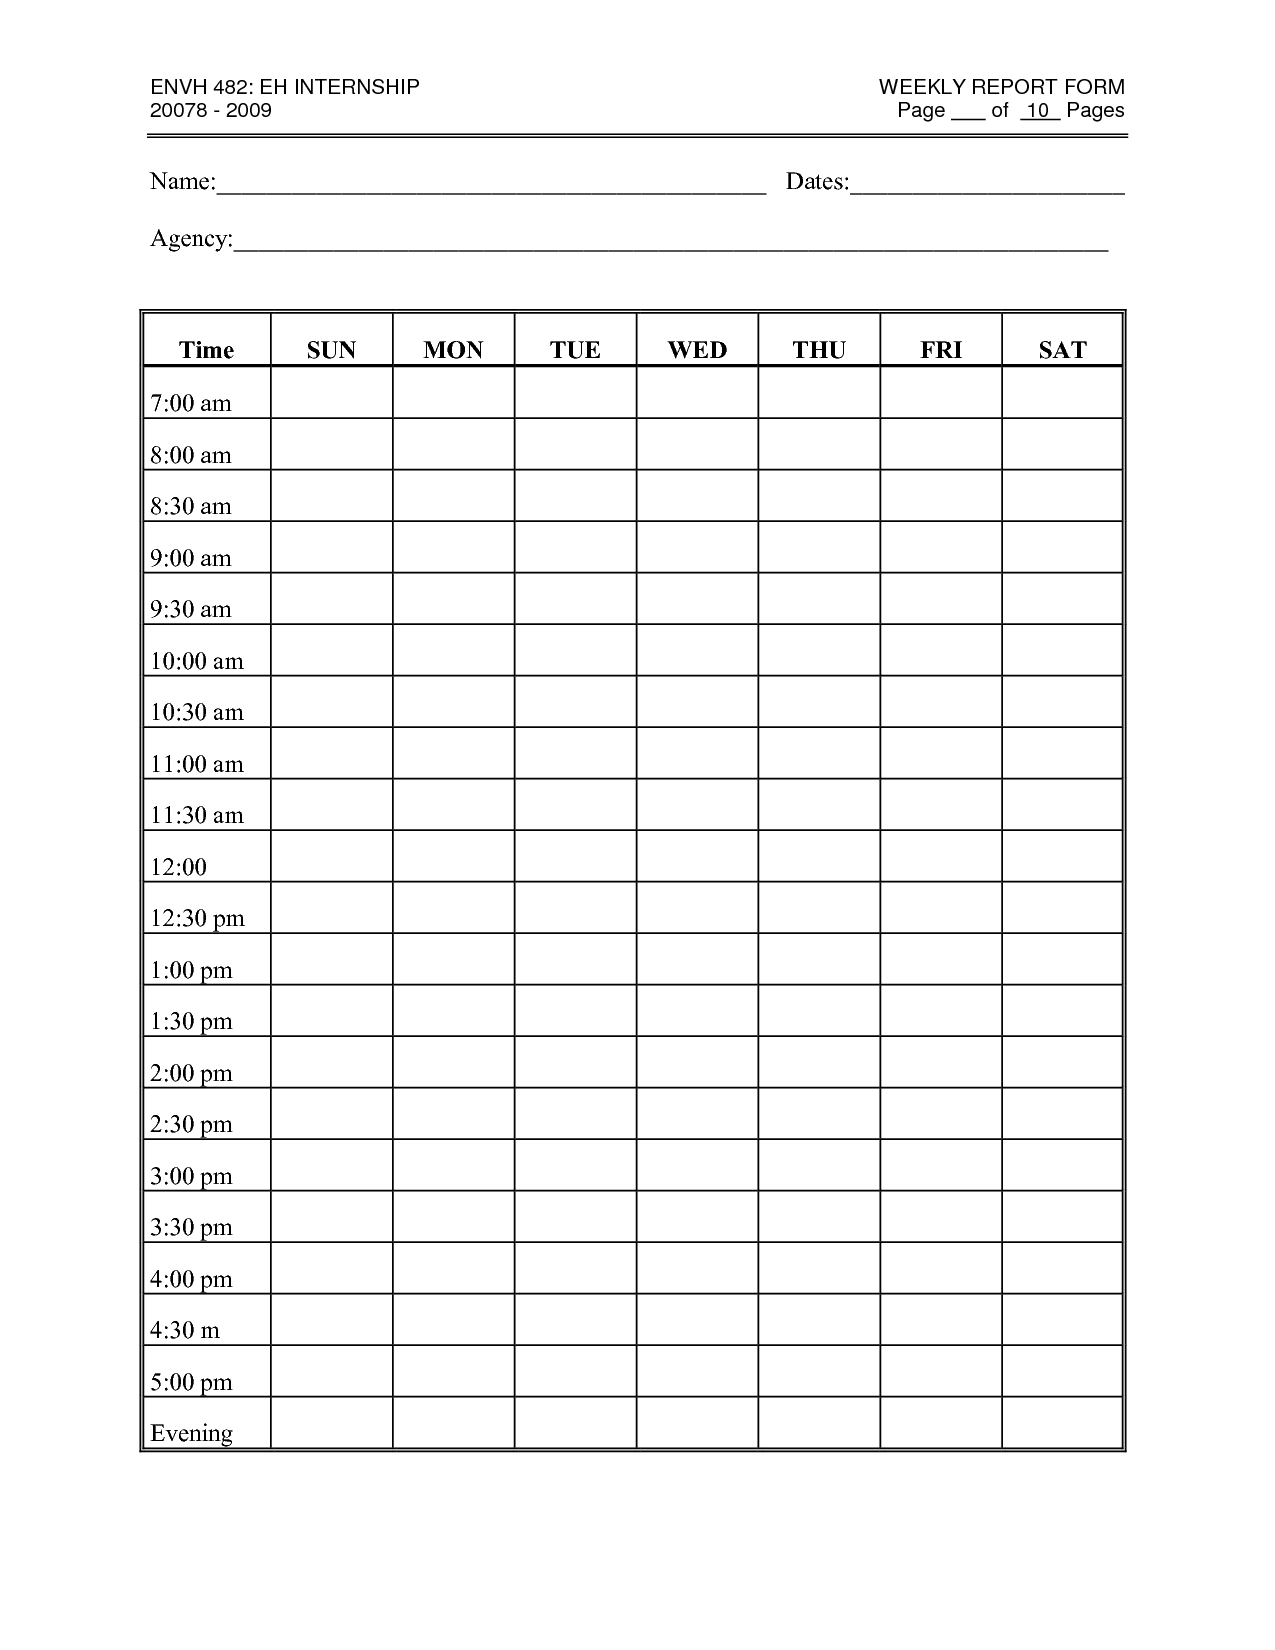 6-best-images-of-daily-workout-log-printable-printable-exercise-log-workout-free-printable